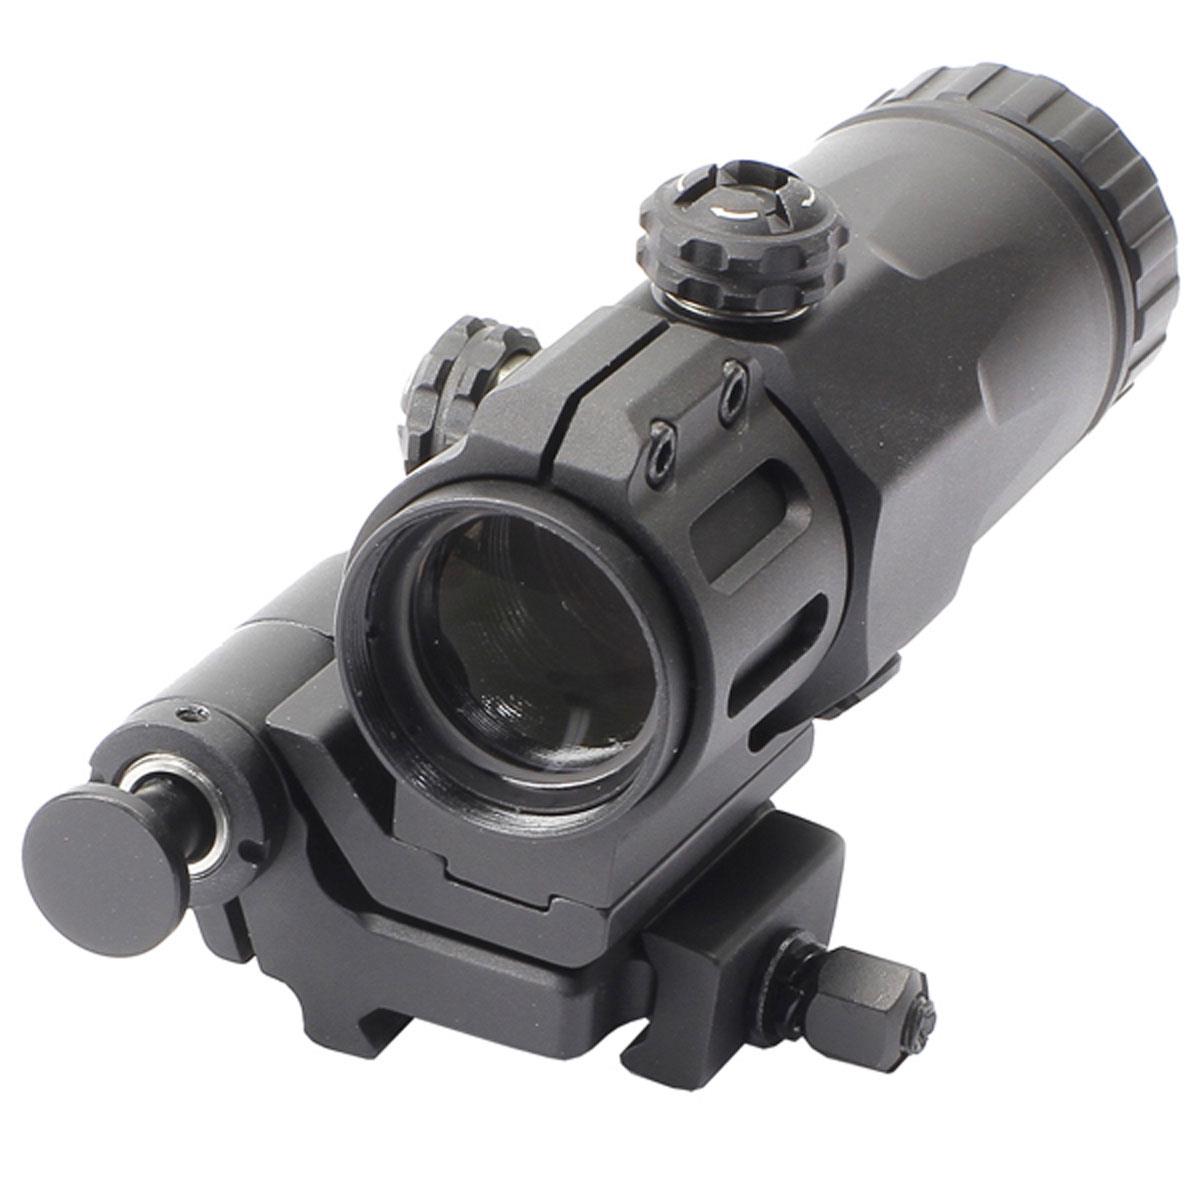 Image of Newcon Optik 3x Lens Riflescope Magnifier for HDS Holographic sight